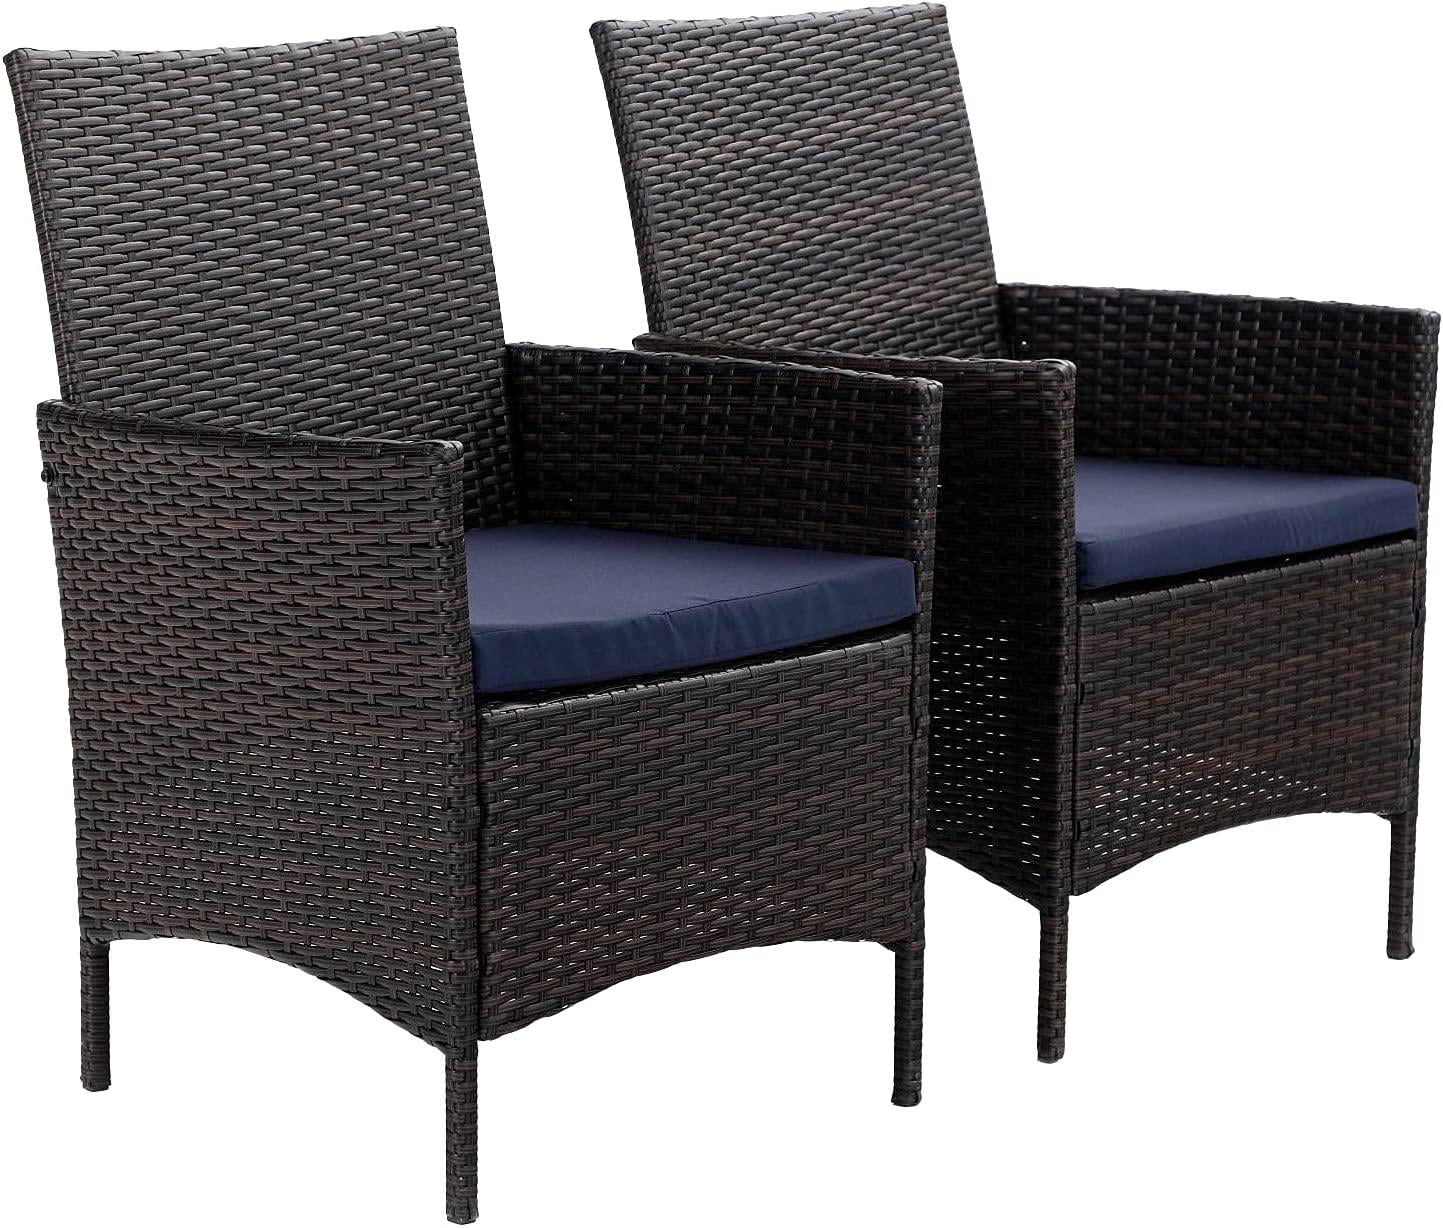 Sophia & William 7 Pieces Outdoor Patio Dining Set, 6 Wicker Dining Chairs and 1 Dining Table with PVC Table Top